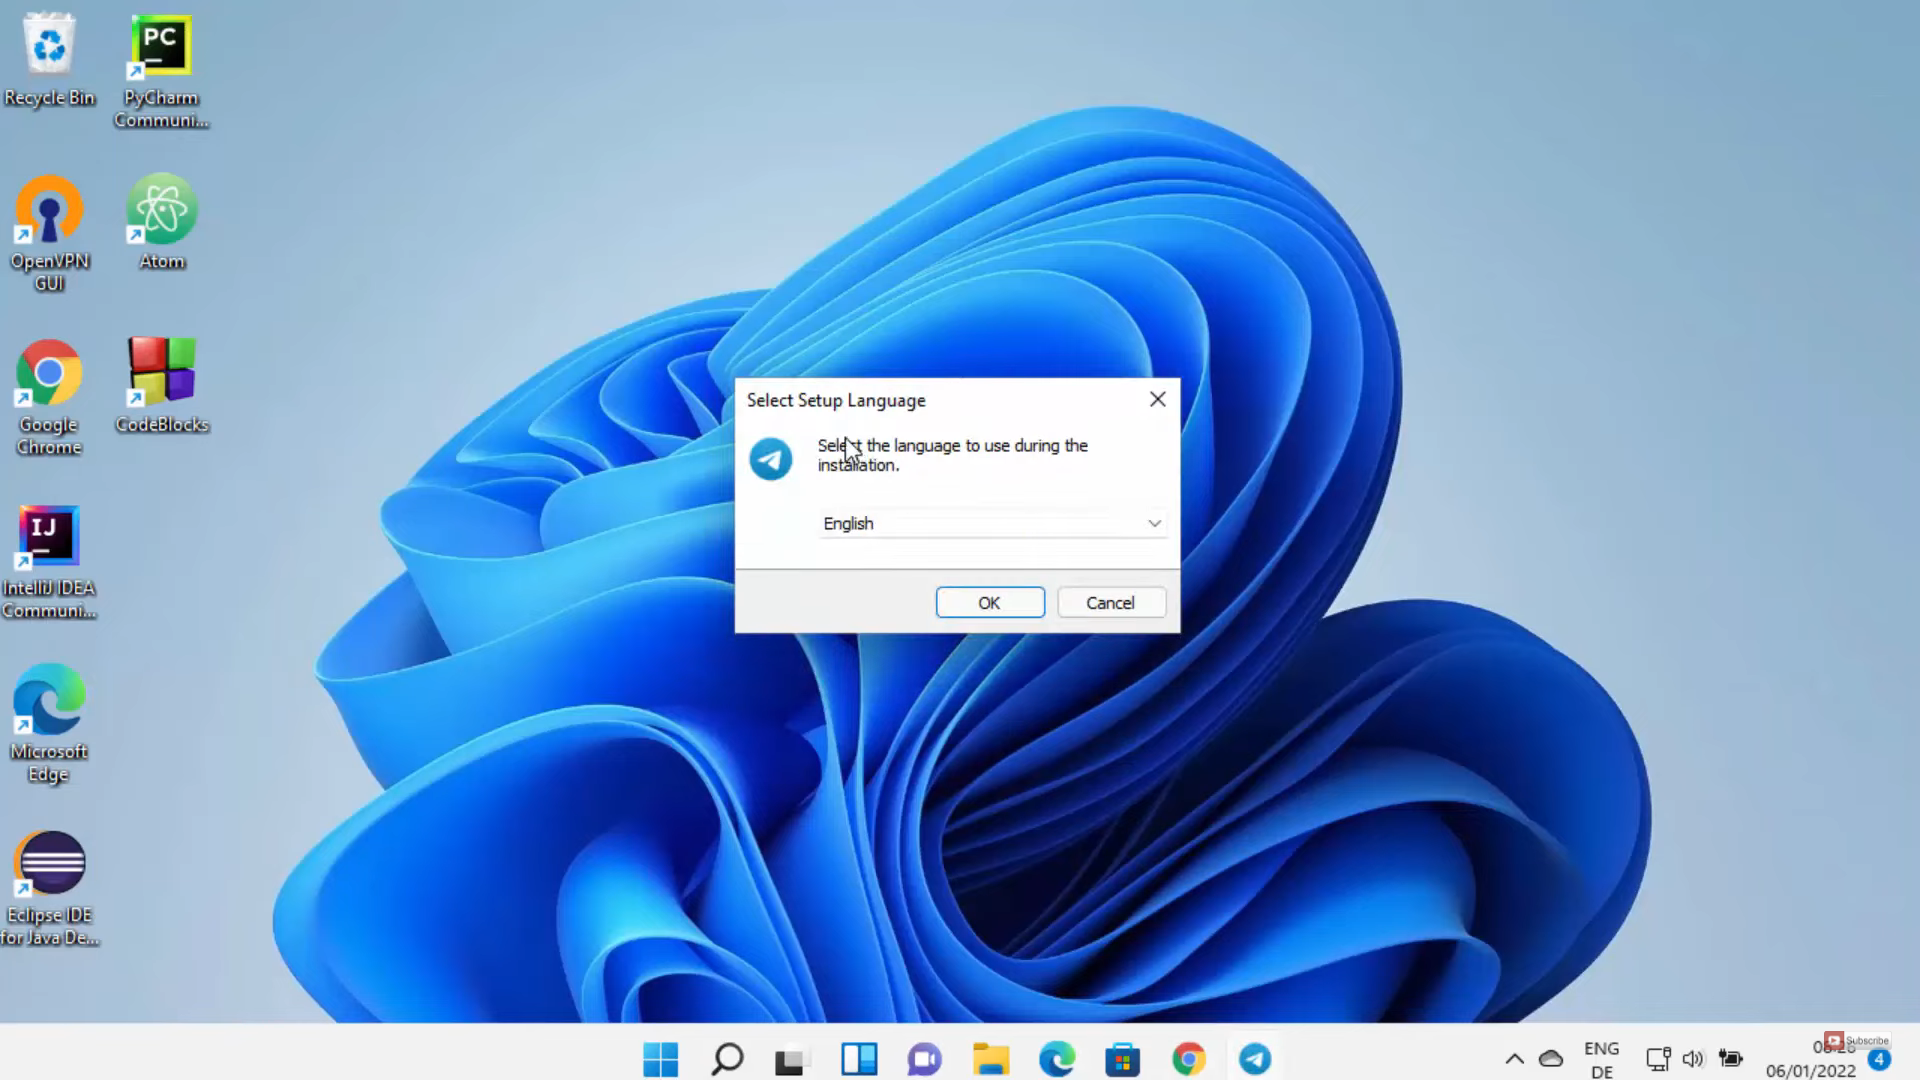 How to Download and Install Telegram on Windows? - GeeksforGeeks